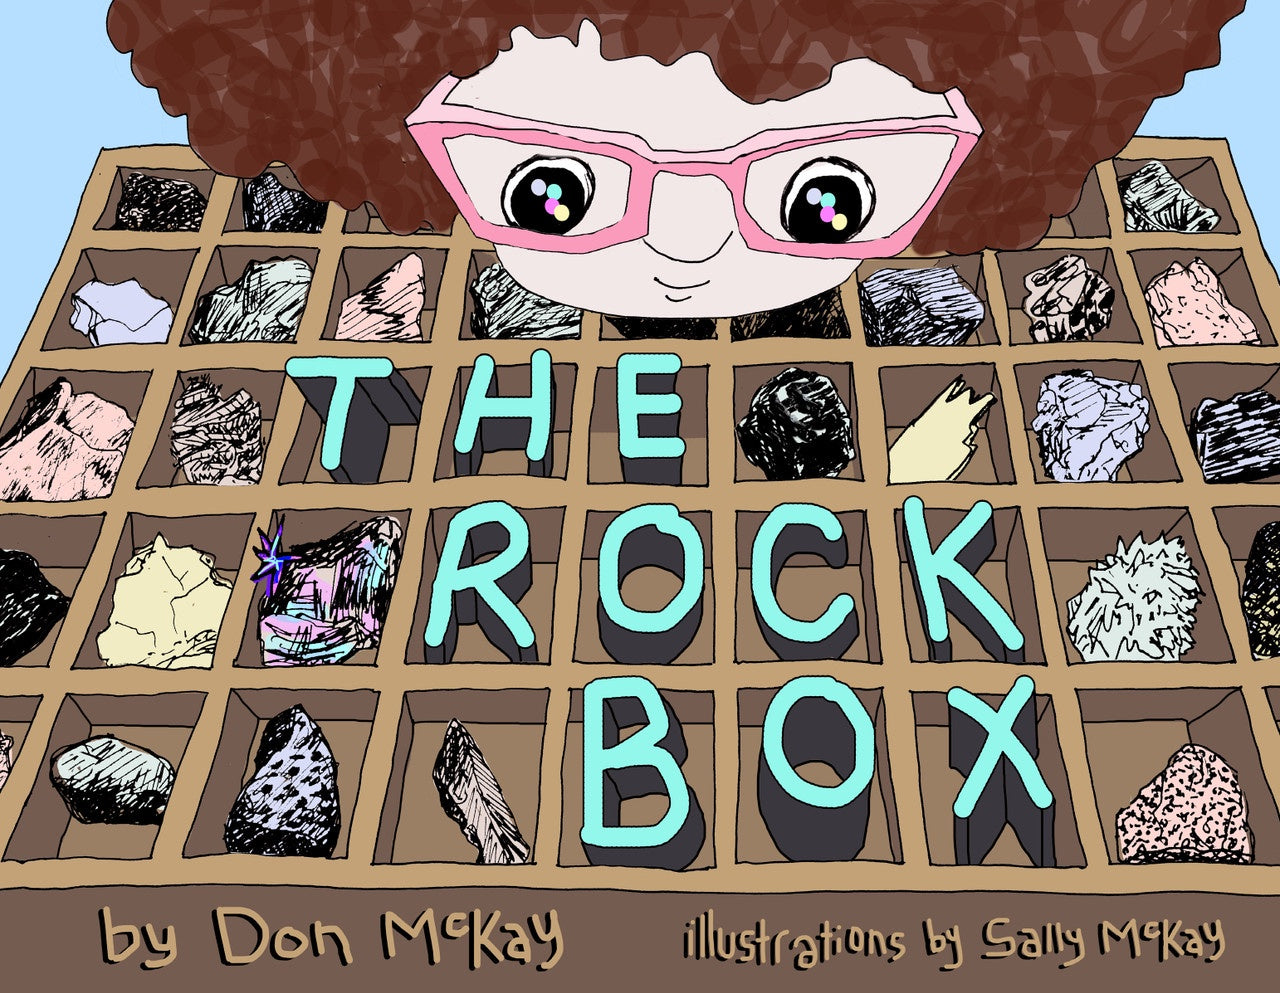 'The Rock Box' by Don McKay